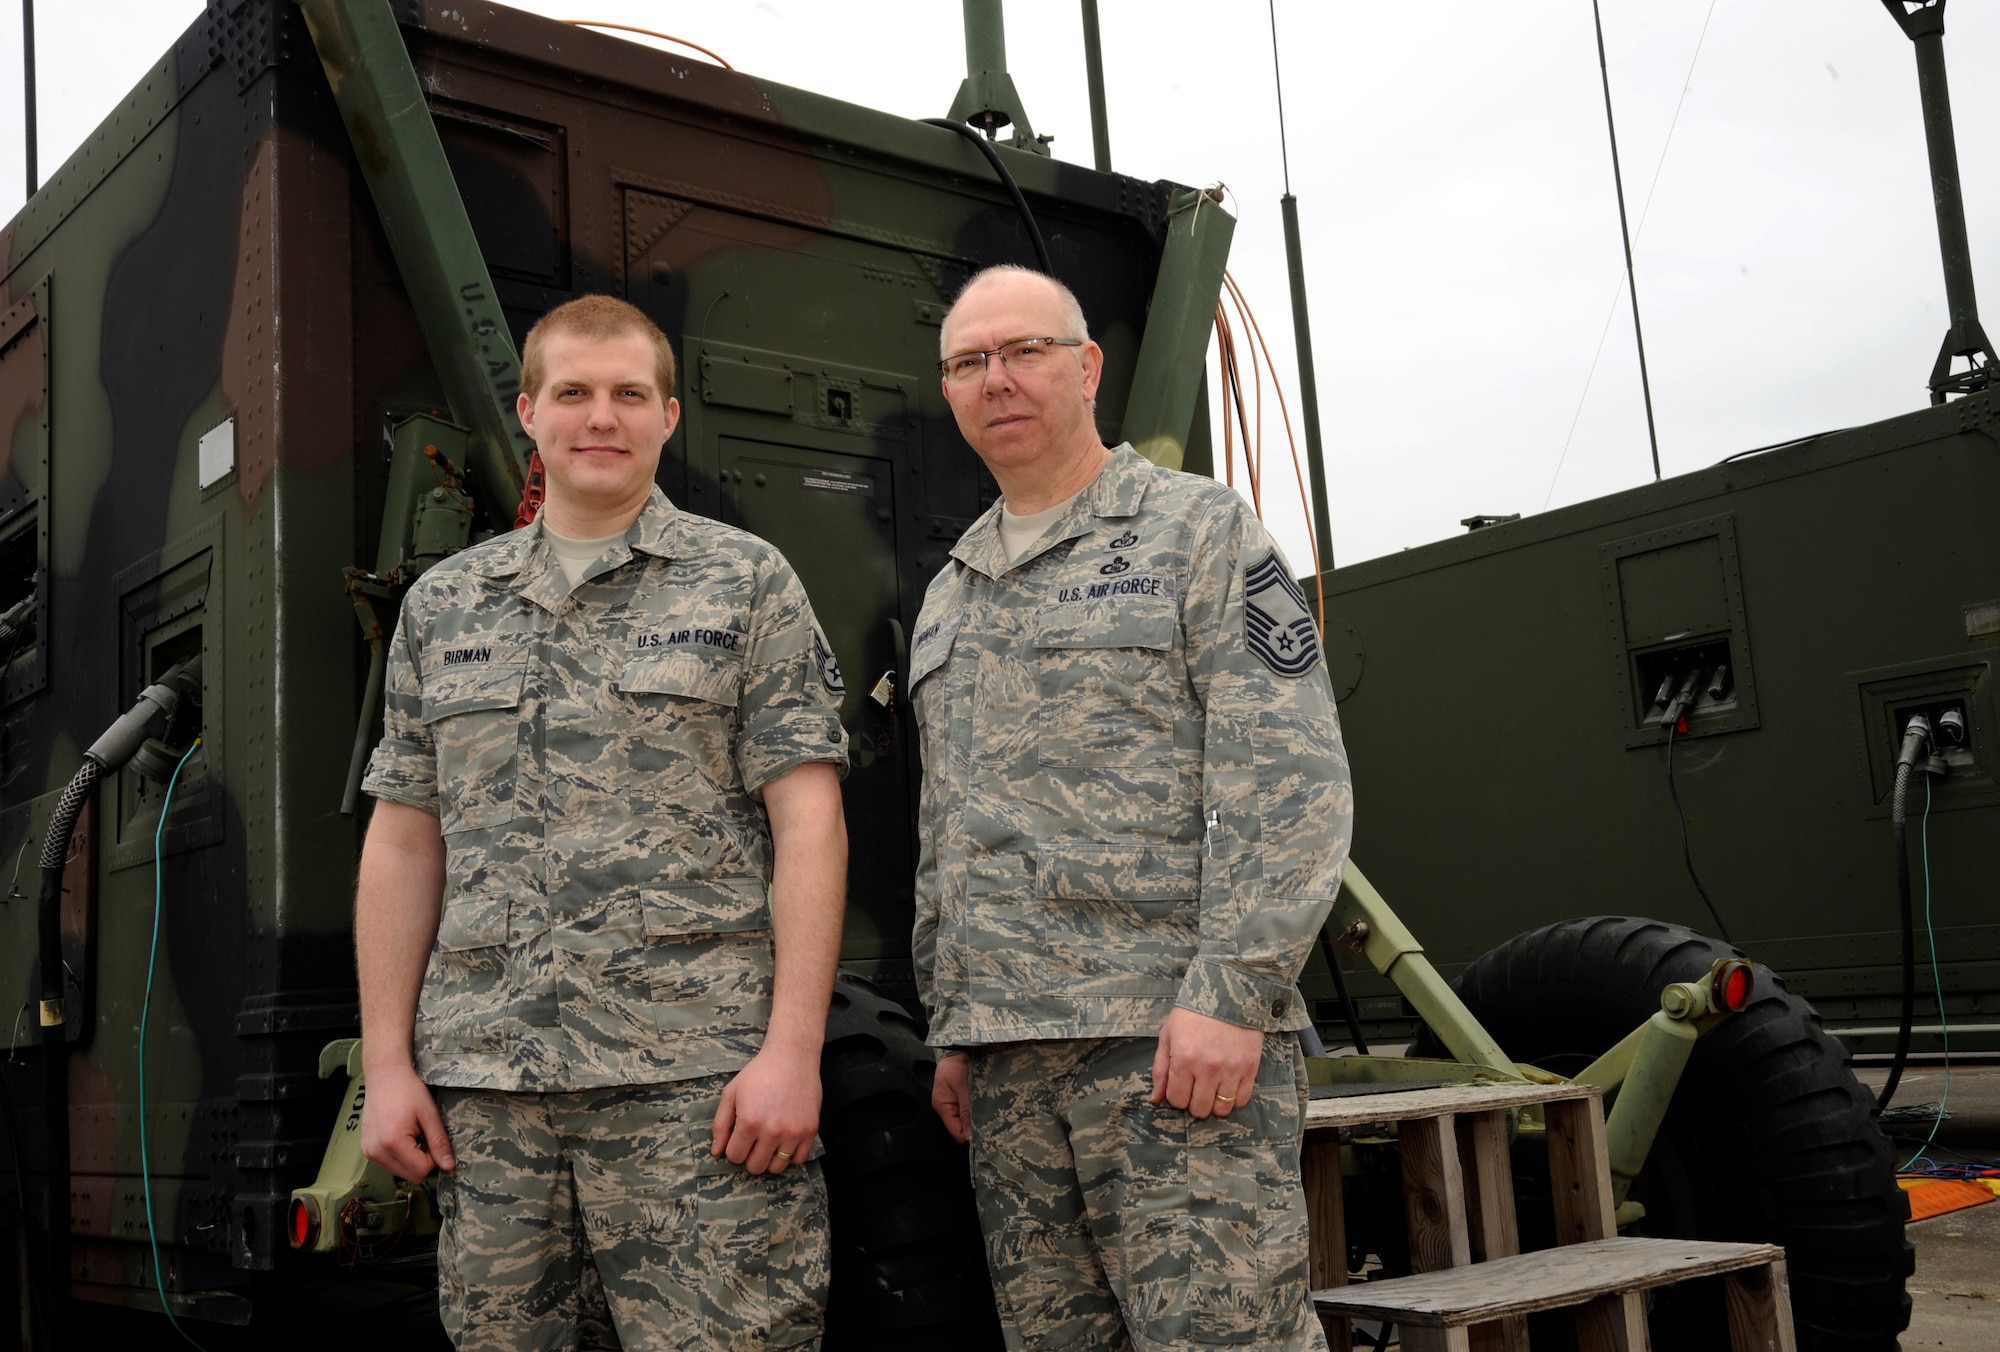 Oregon Air National Guard Staff Sgt. Tyler Birman and Chief Master Sgt. Bob Birman of the 116th Air Control Squadron stand outside some of their current mission stations during pre-deploy at Camp Rilea, Ore., on February 3, 2011. The father and son Airmen are preparing to deploy to the Middle East as part of Air Force Centeral Command (CENTAF) and are training on the new Battle Control Center, otherwise known as the BC-3 equipment they will use in-theater when they arrive in March of 2011. (U.S. Air Force Photograph by Tech. Sgt. John Hughel, 142nd Fighter Wing Public Affairs)